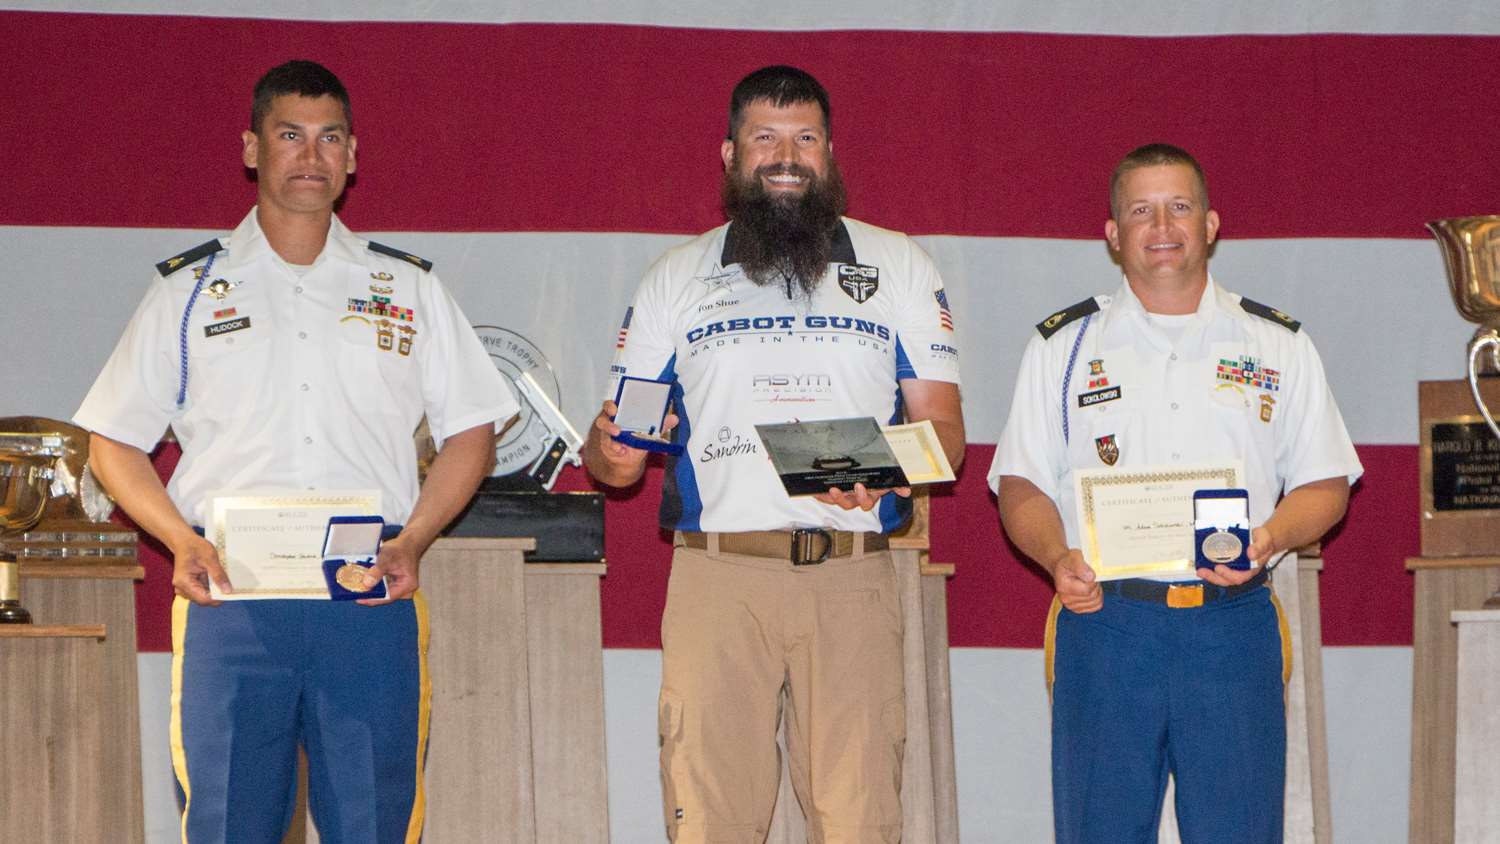 2018 NRA National Pistol Championship | Top 3 Shooters